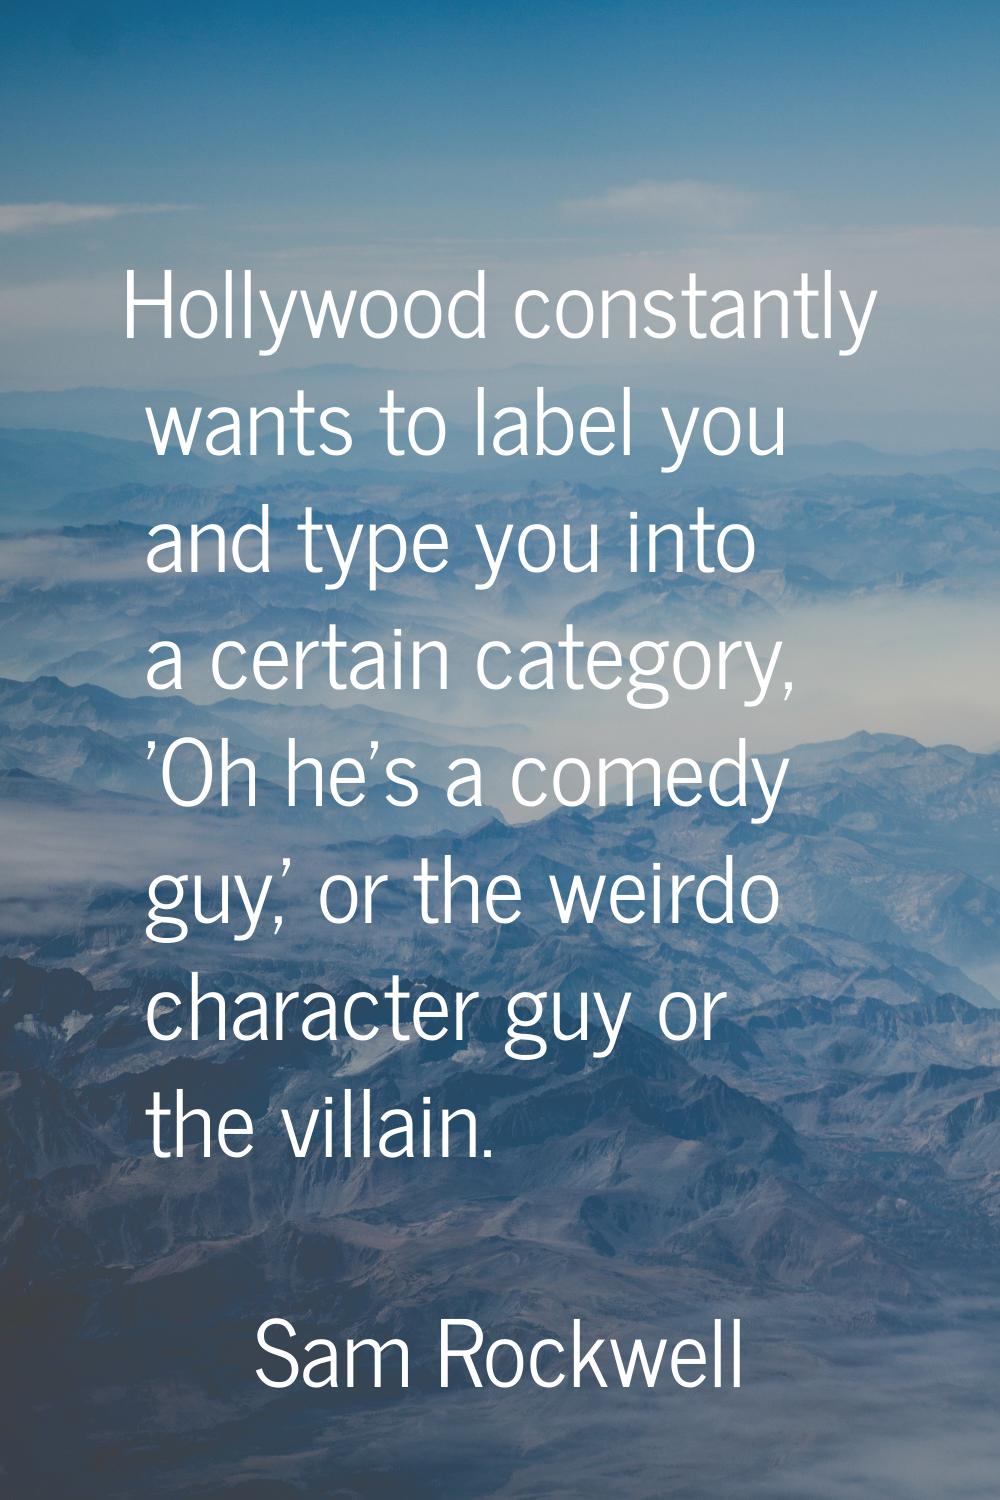 Hollywood constantly wants to label you and type you into a certain category, 'Oh he's a comedy guy